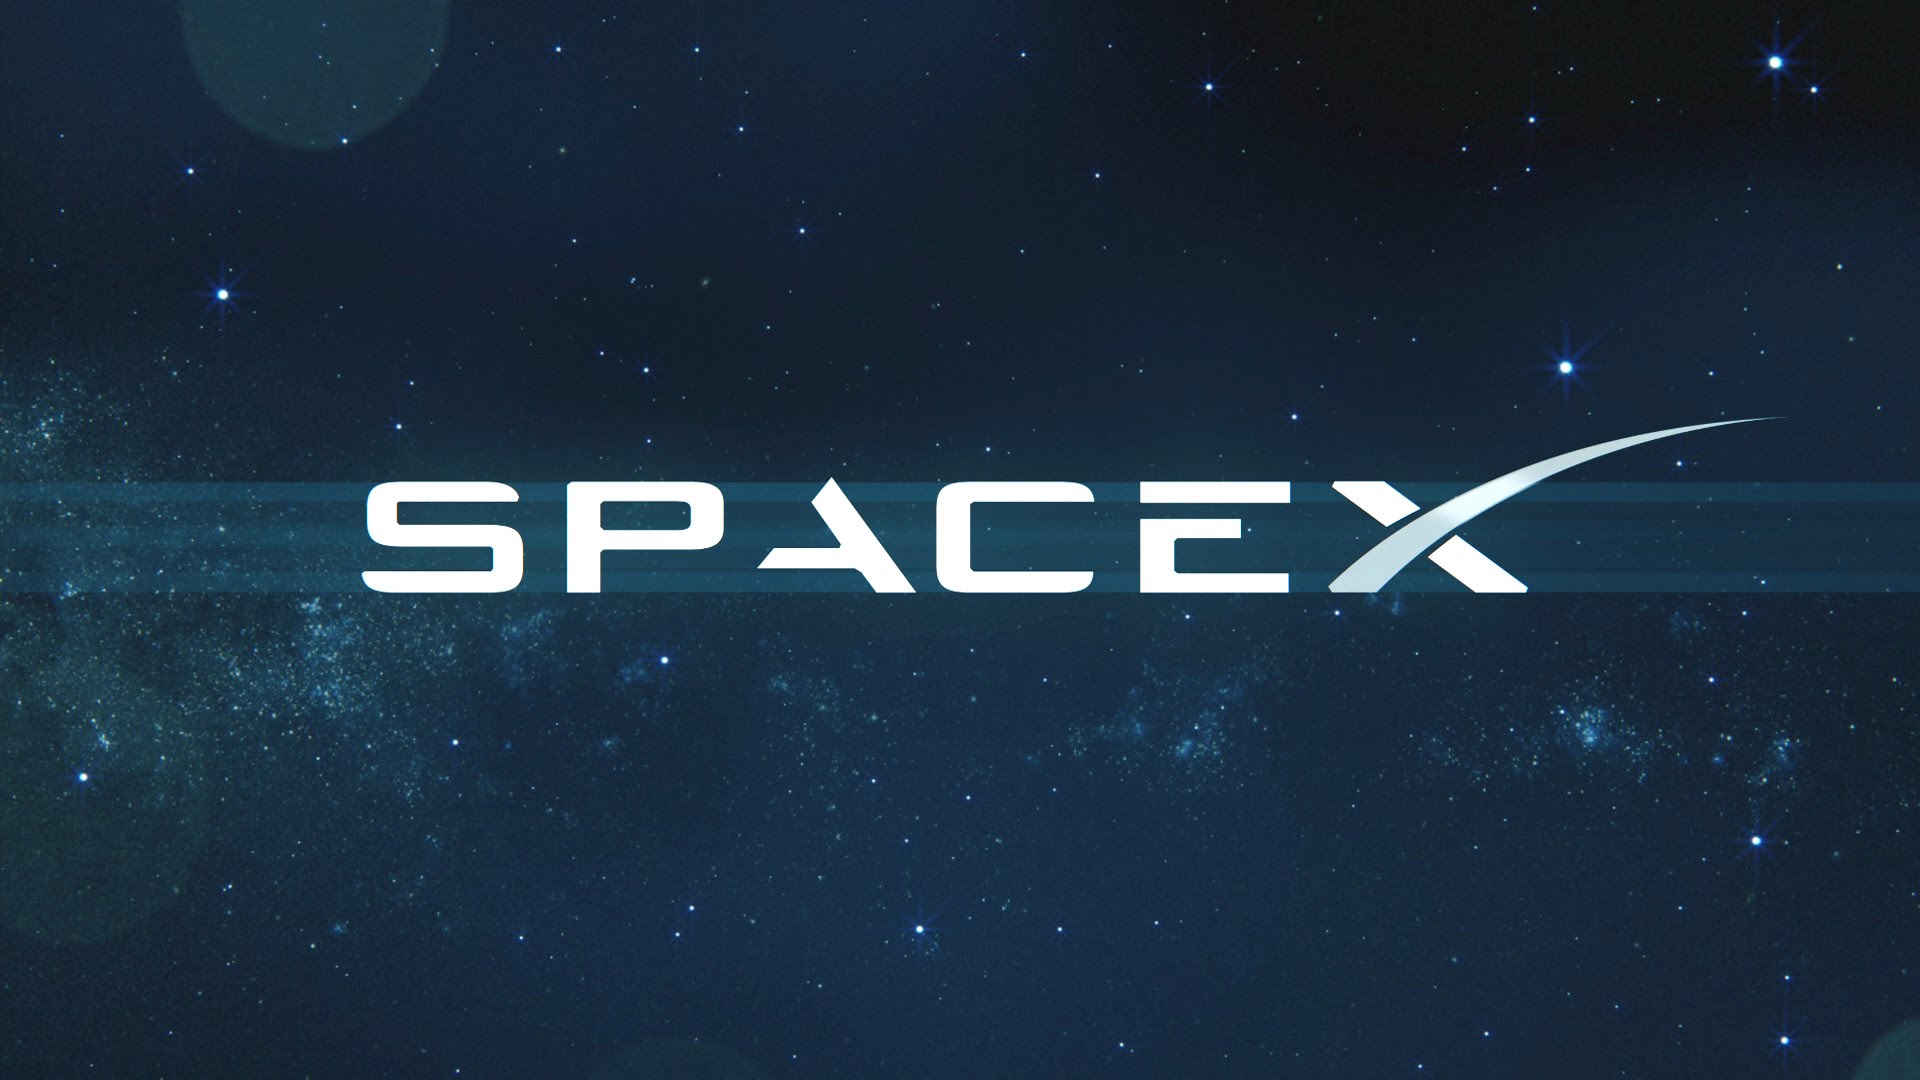 Nice wallpapers SpaceX 1920x1080px